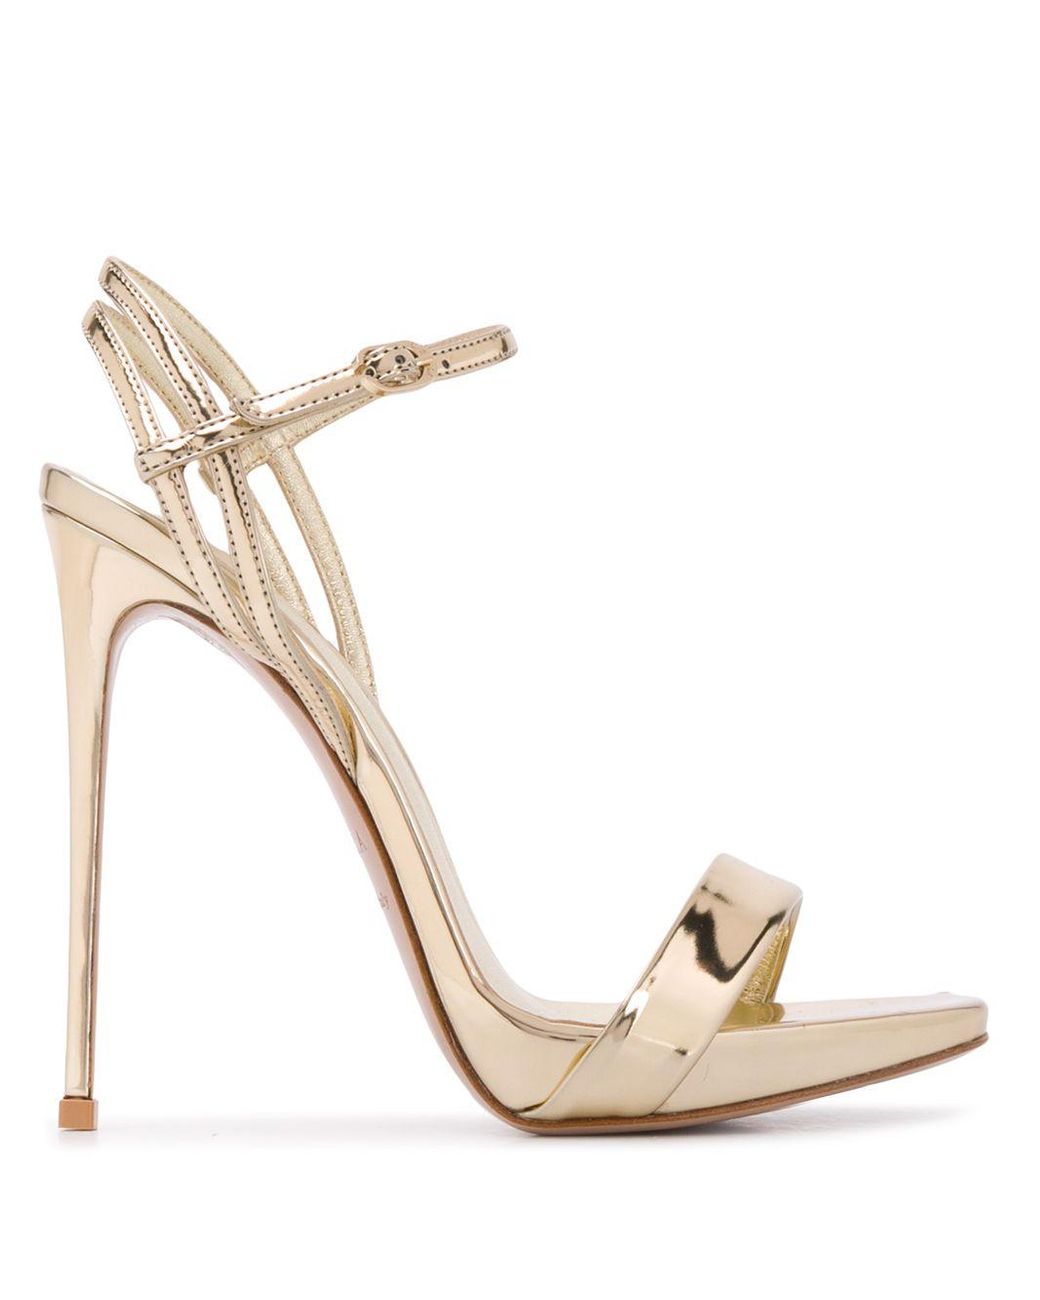 Le Silla Leather Ankle Strap 1300mm Heel Sandals in Gold (Metallic) - Lyst